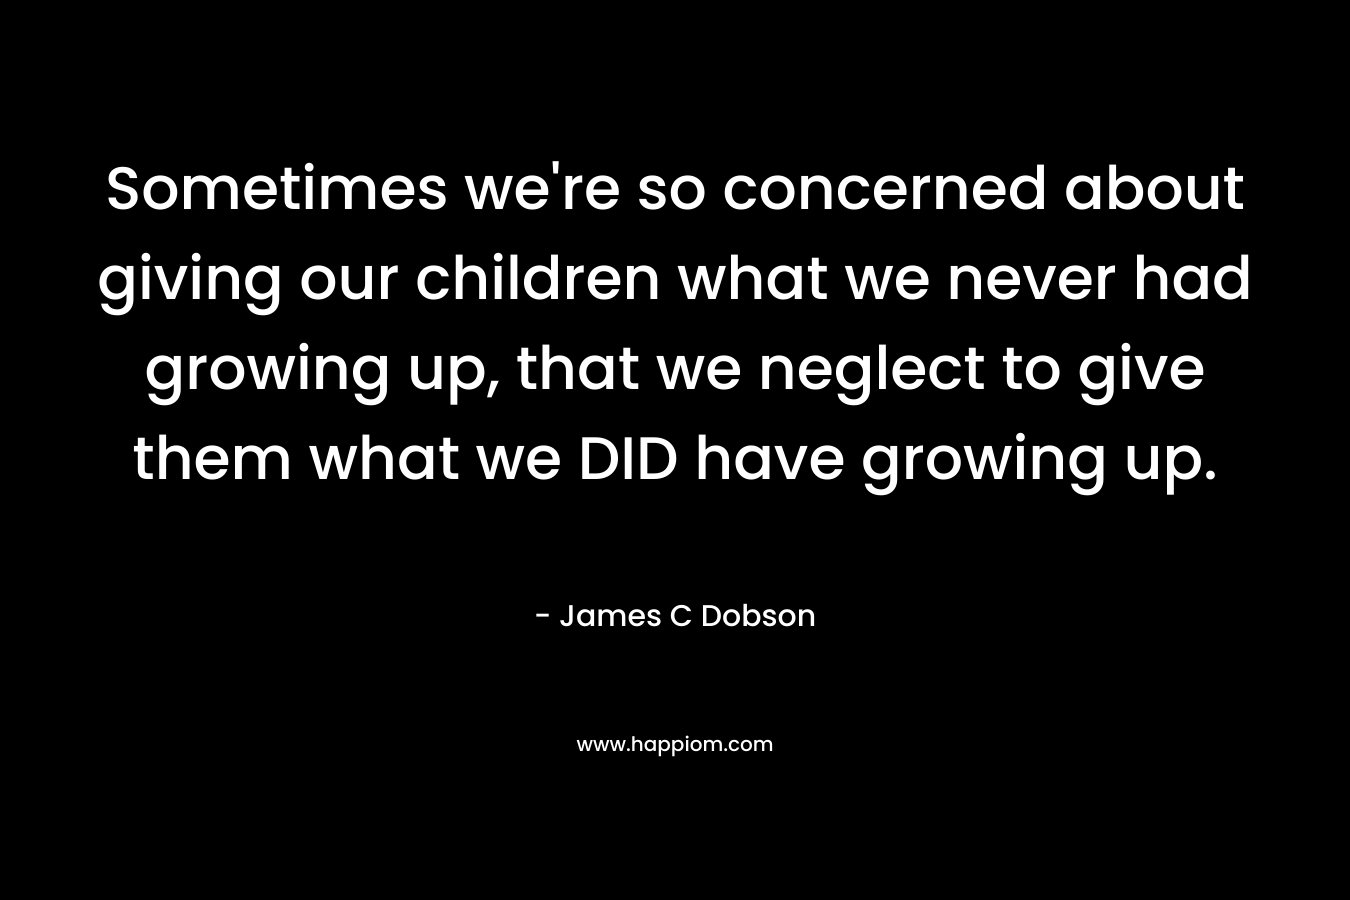 Sometimes we’re so concerned about giving our children what we never had growing up, that we neglect to give them what we DID have growing up. – James C Dobson